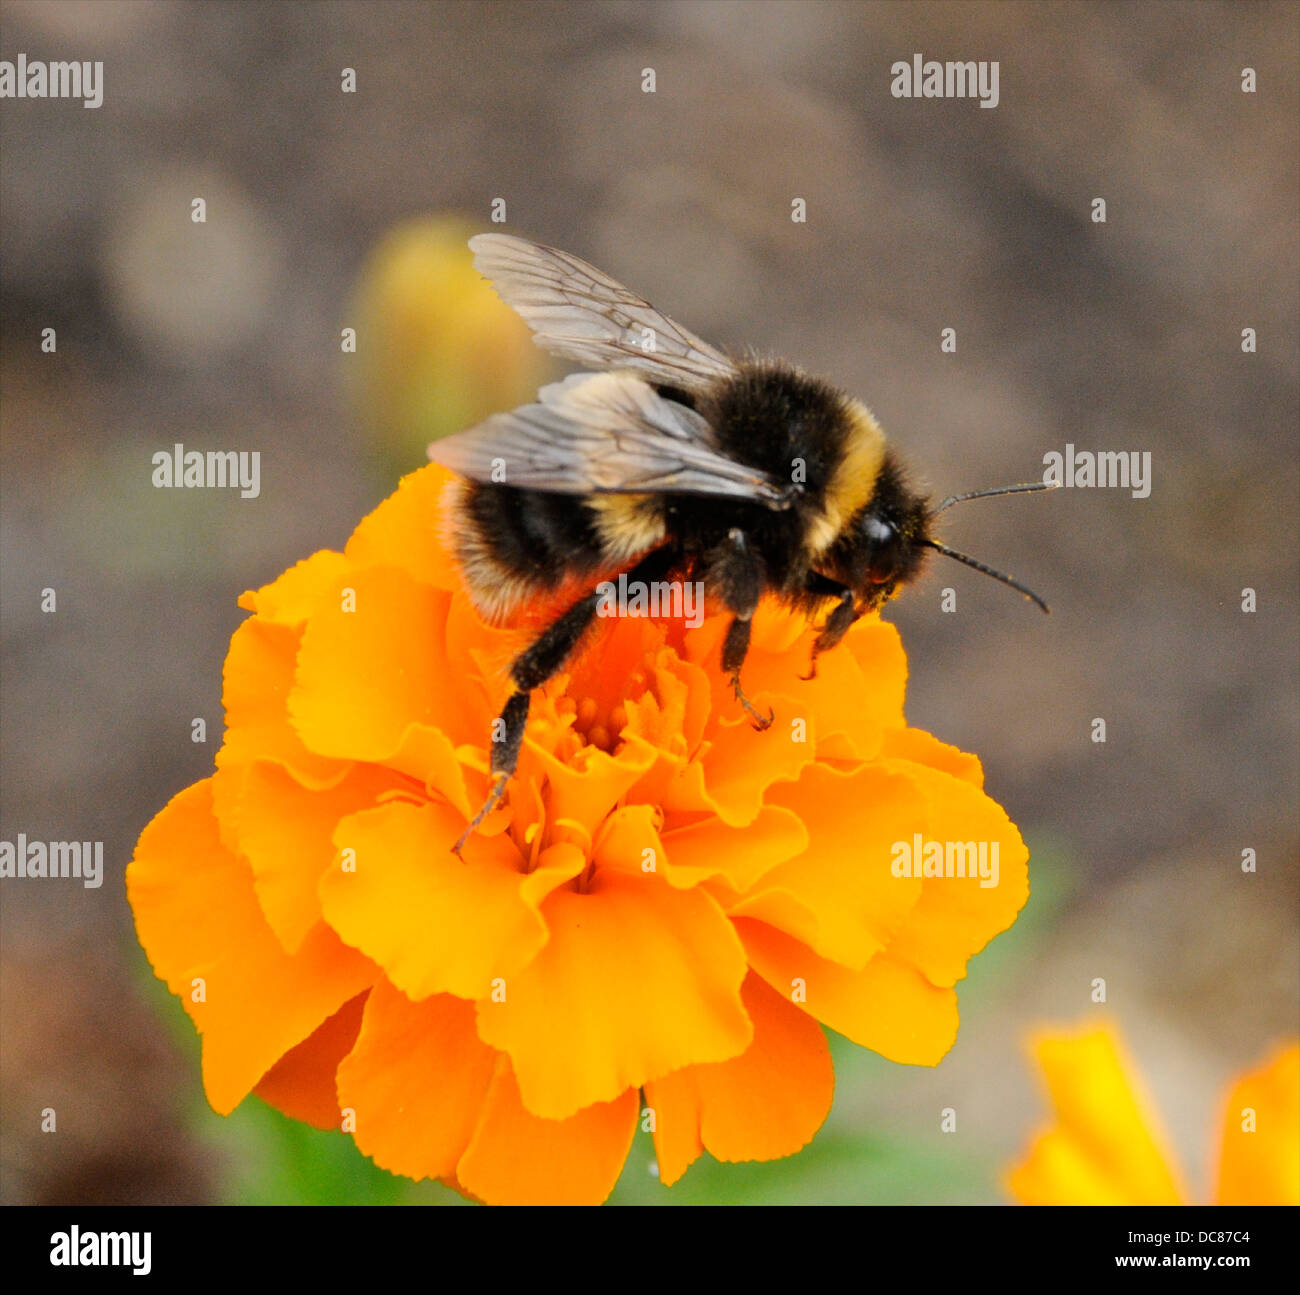 Bumble bee on a flower marigold Stock Photo